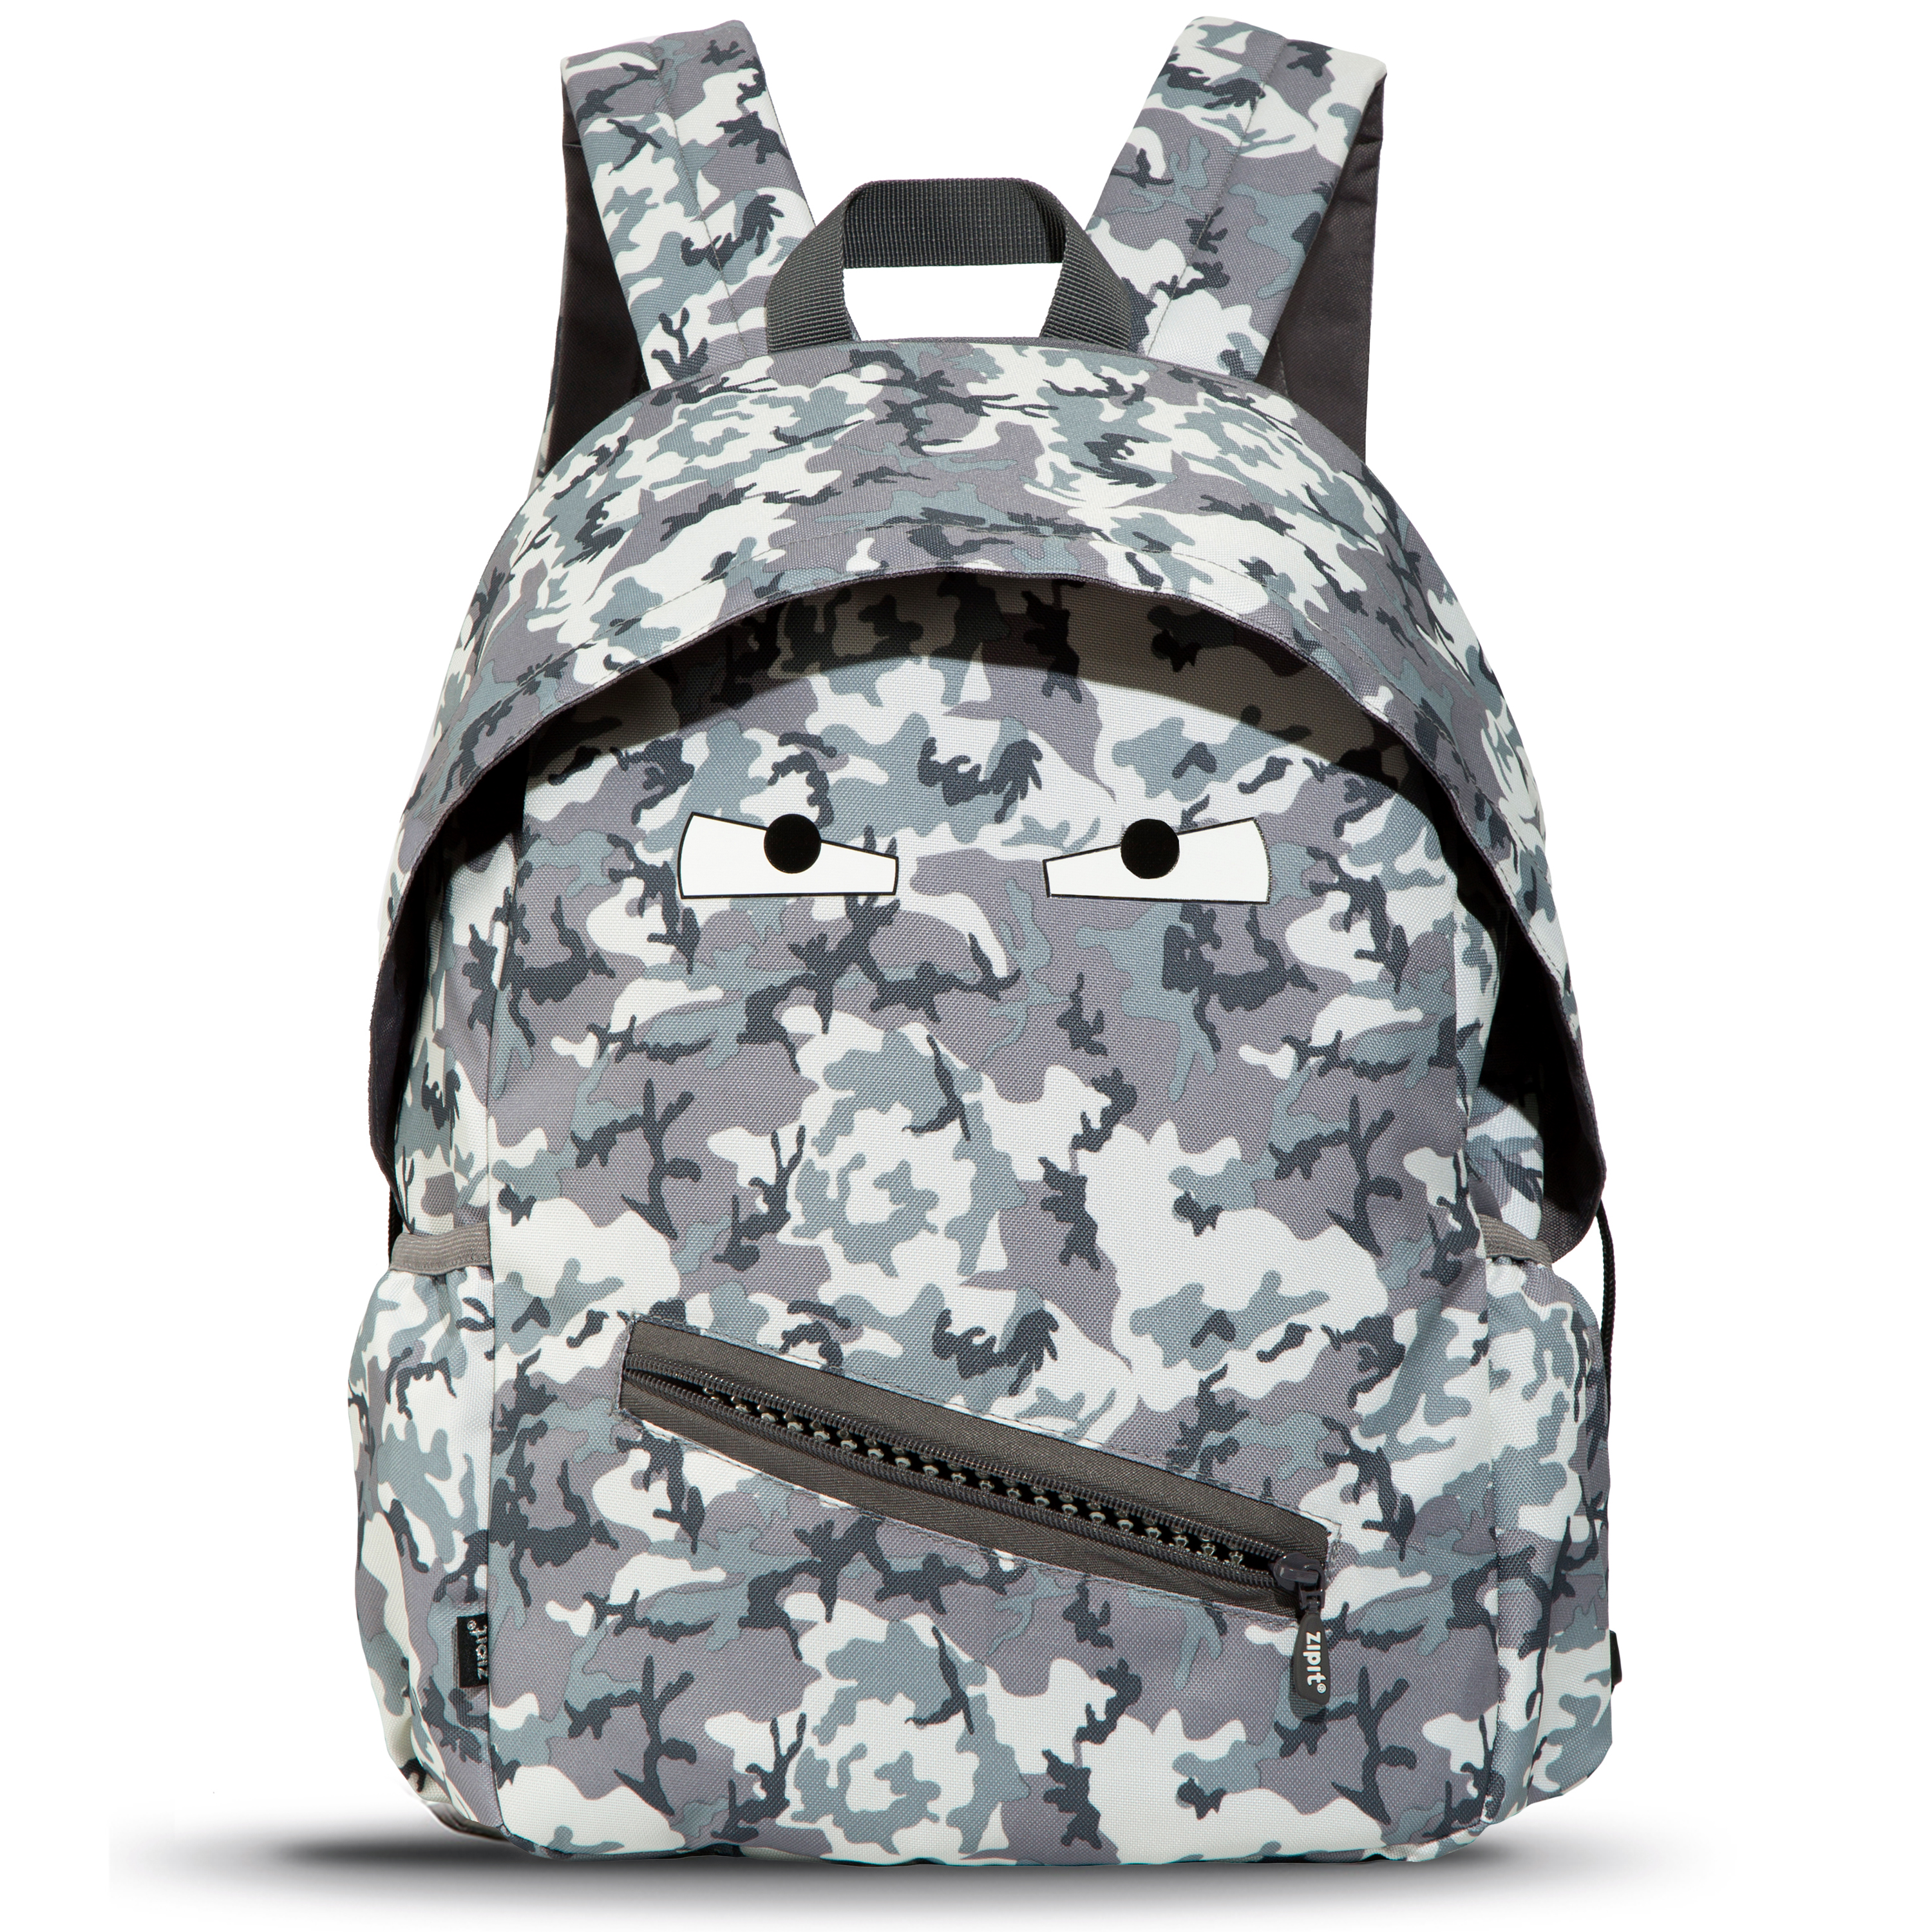 ZIPIT Grillz Backpack for Boys Elementary School & Preschool, Cute Book Bag for Kids (Camo Grey) - image 1 of 10